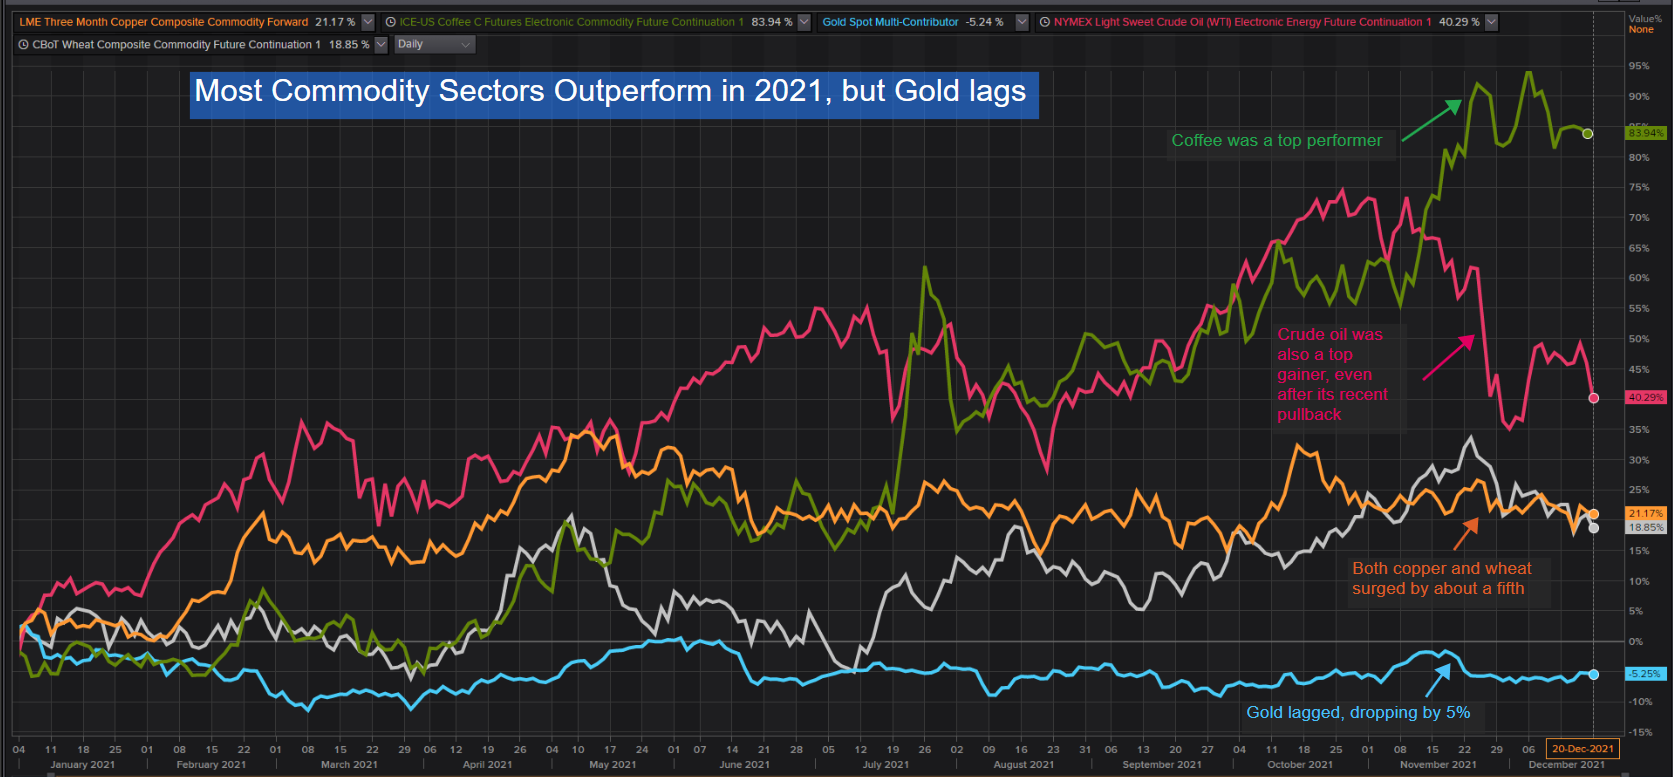 Most Commodity Sectors Outperform in 2021